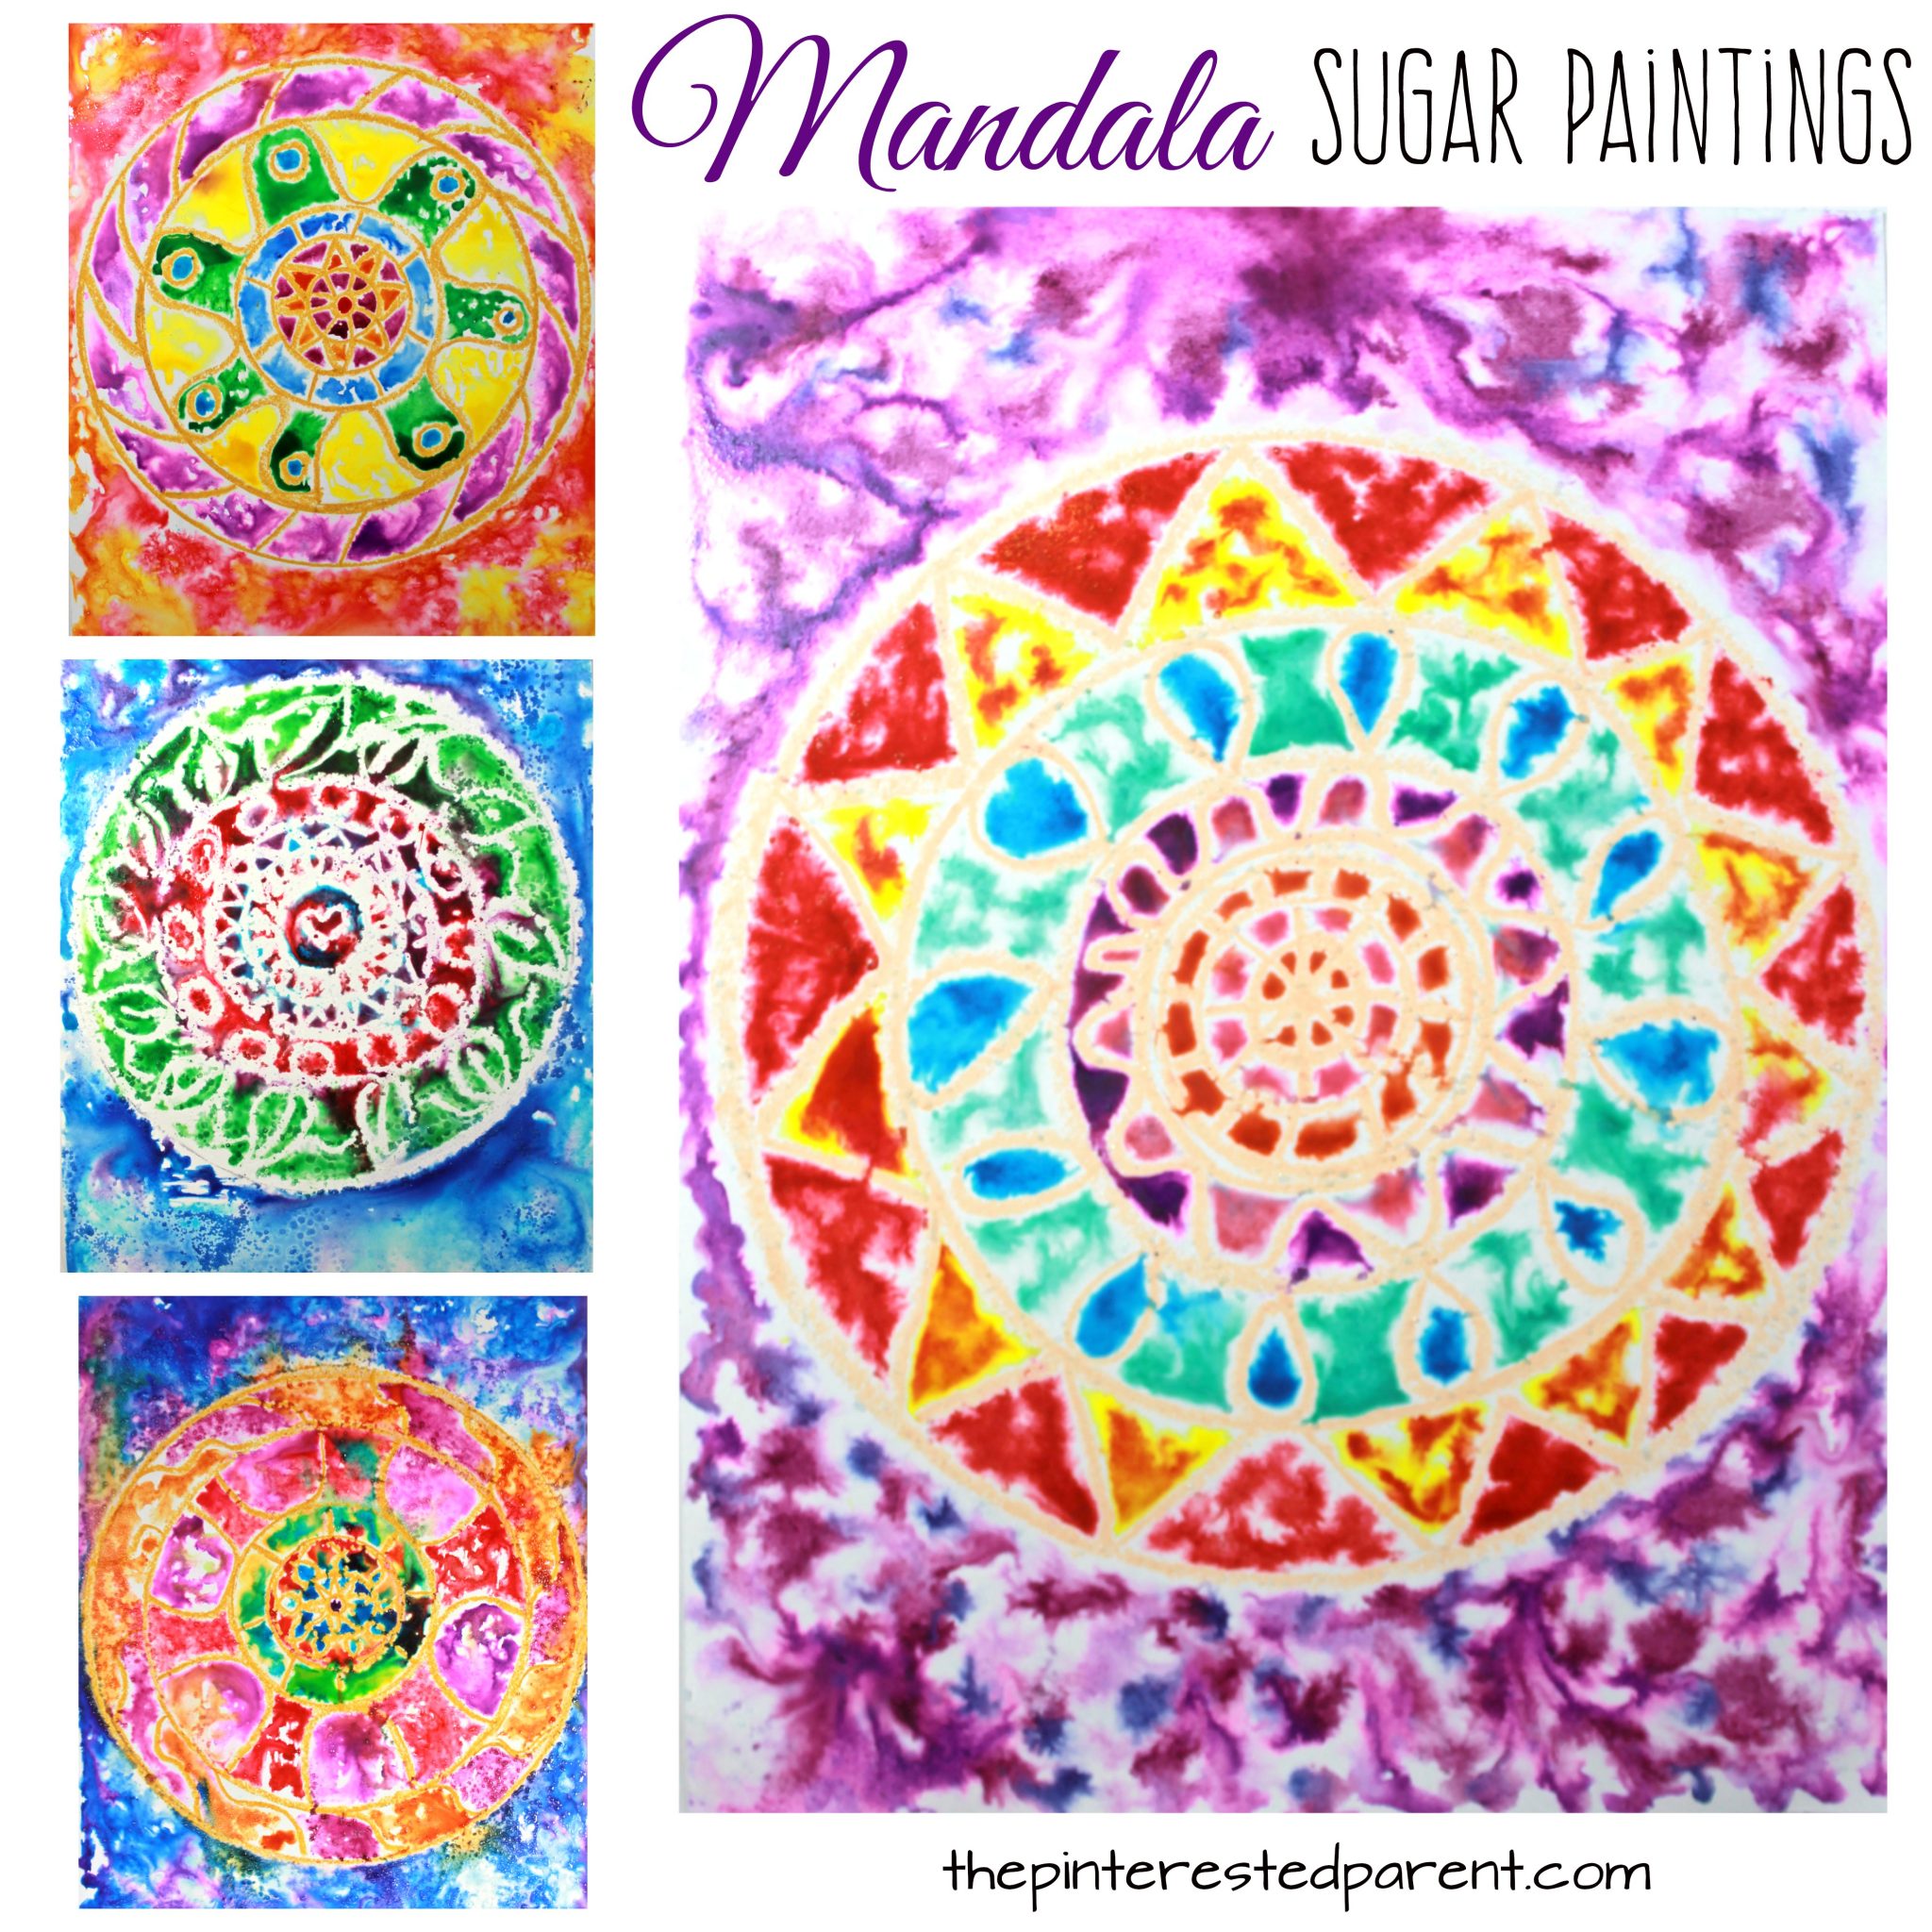 Sugar painting is a gorgeous paint technique and fun process. - Glossy sugar painted mandalas - Kids arts and crafts